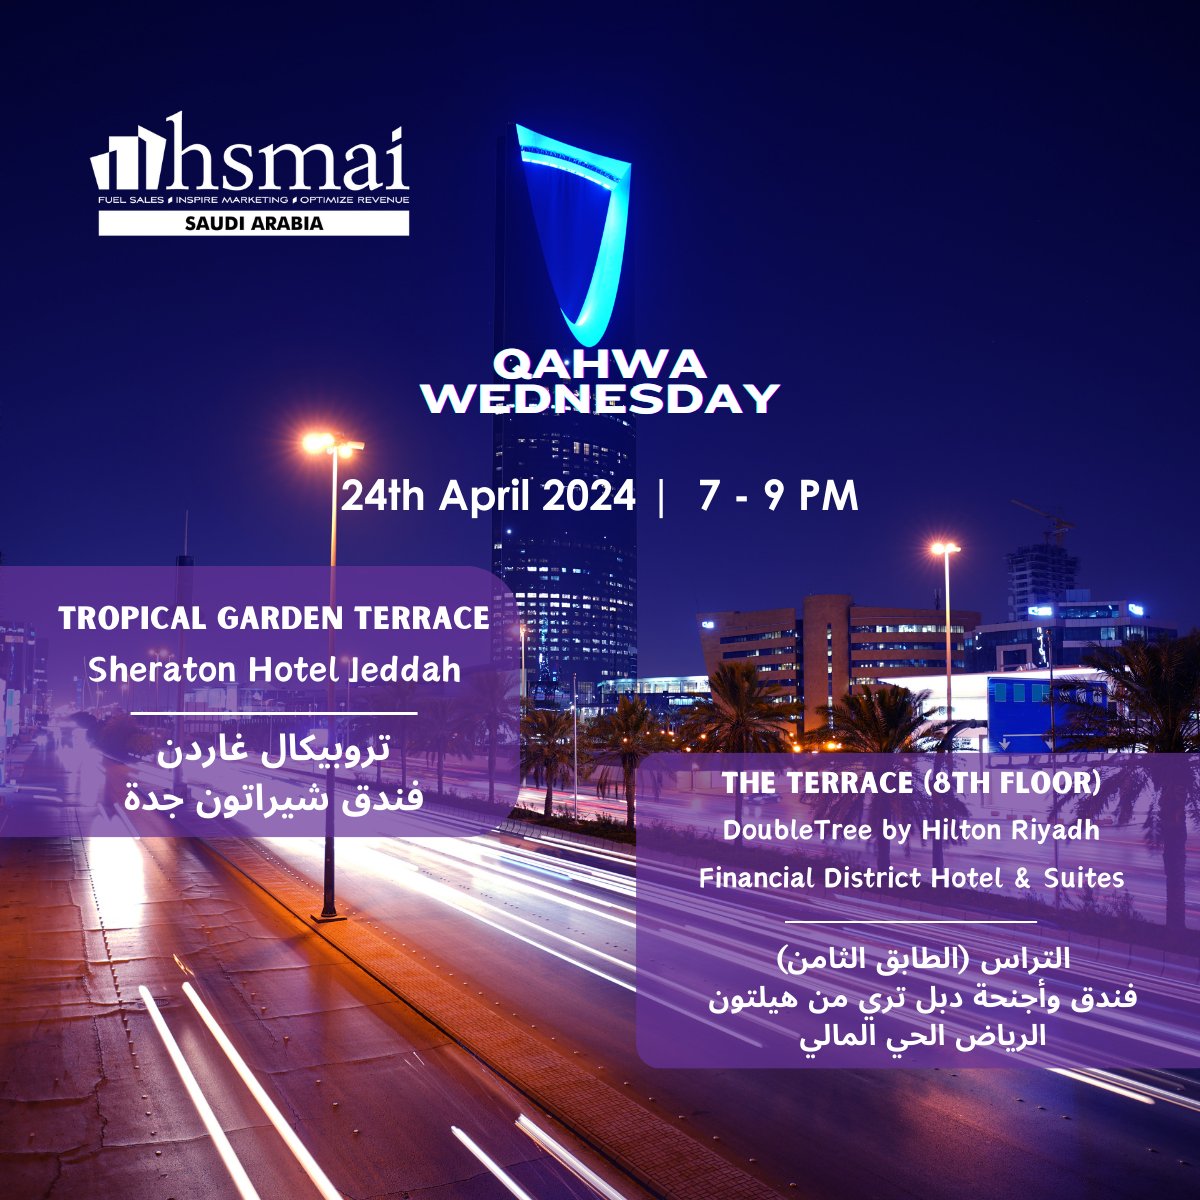 KSA Qahwa Wednesday is a winddown networking opportunity for the hospitality industry to meet after work. Save your space on 24th April at two venues:

- Sheraton Hotel Jeddah
- DoubleTree by Hilton Riyadh Financial District Hotel & Suites

Book now: hsmaime.org/product/qahwa-…